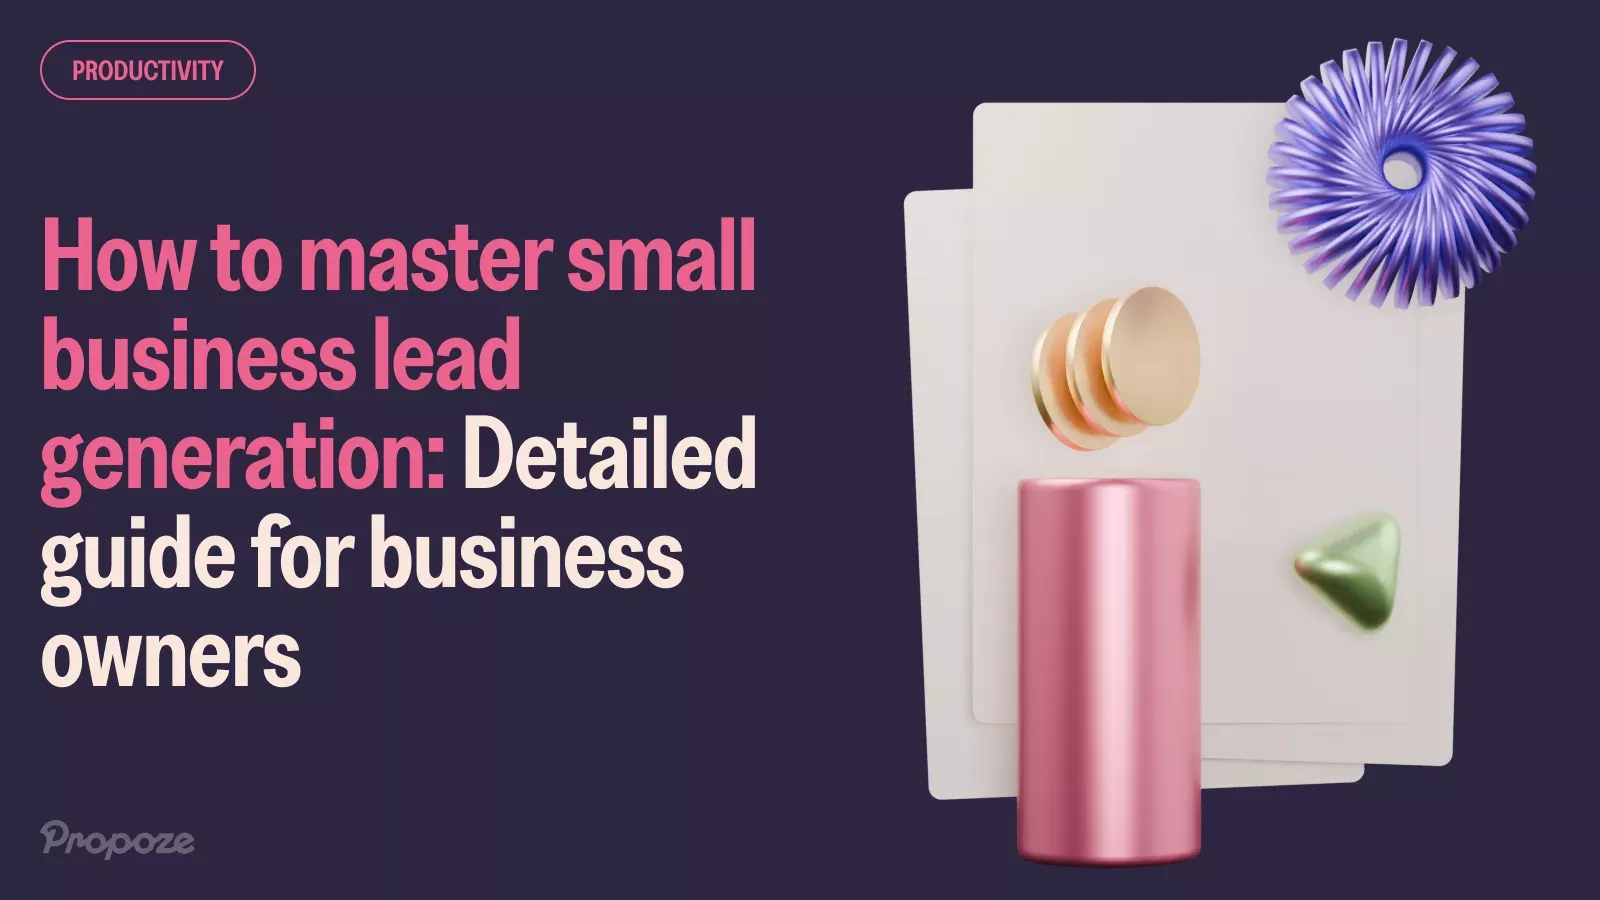 How To Master Small Business Lead Generation? (Detailed Guide for Business Owners)